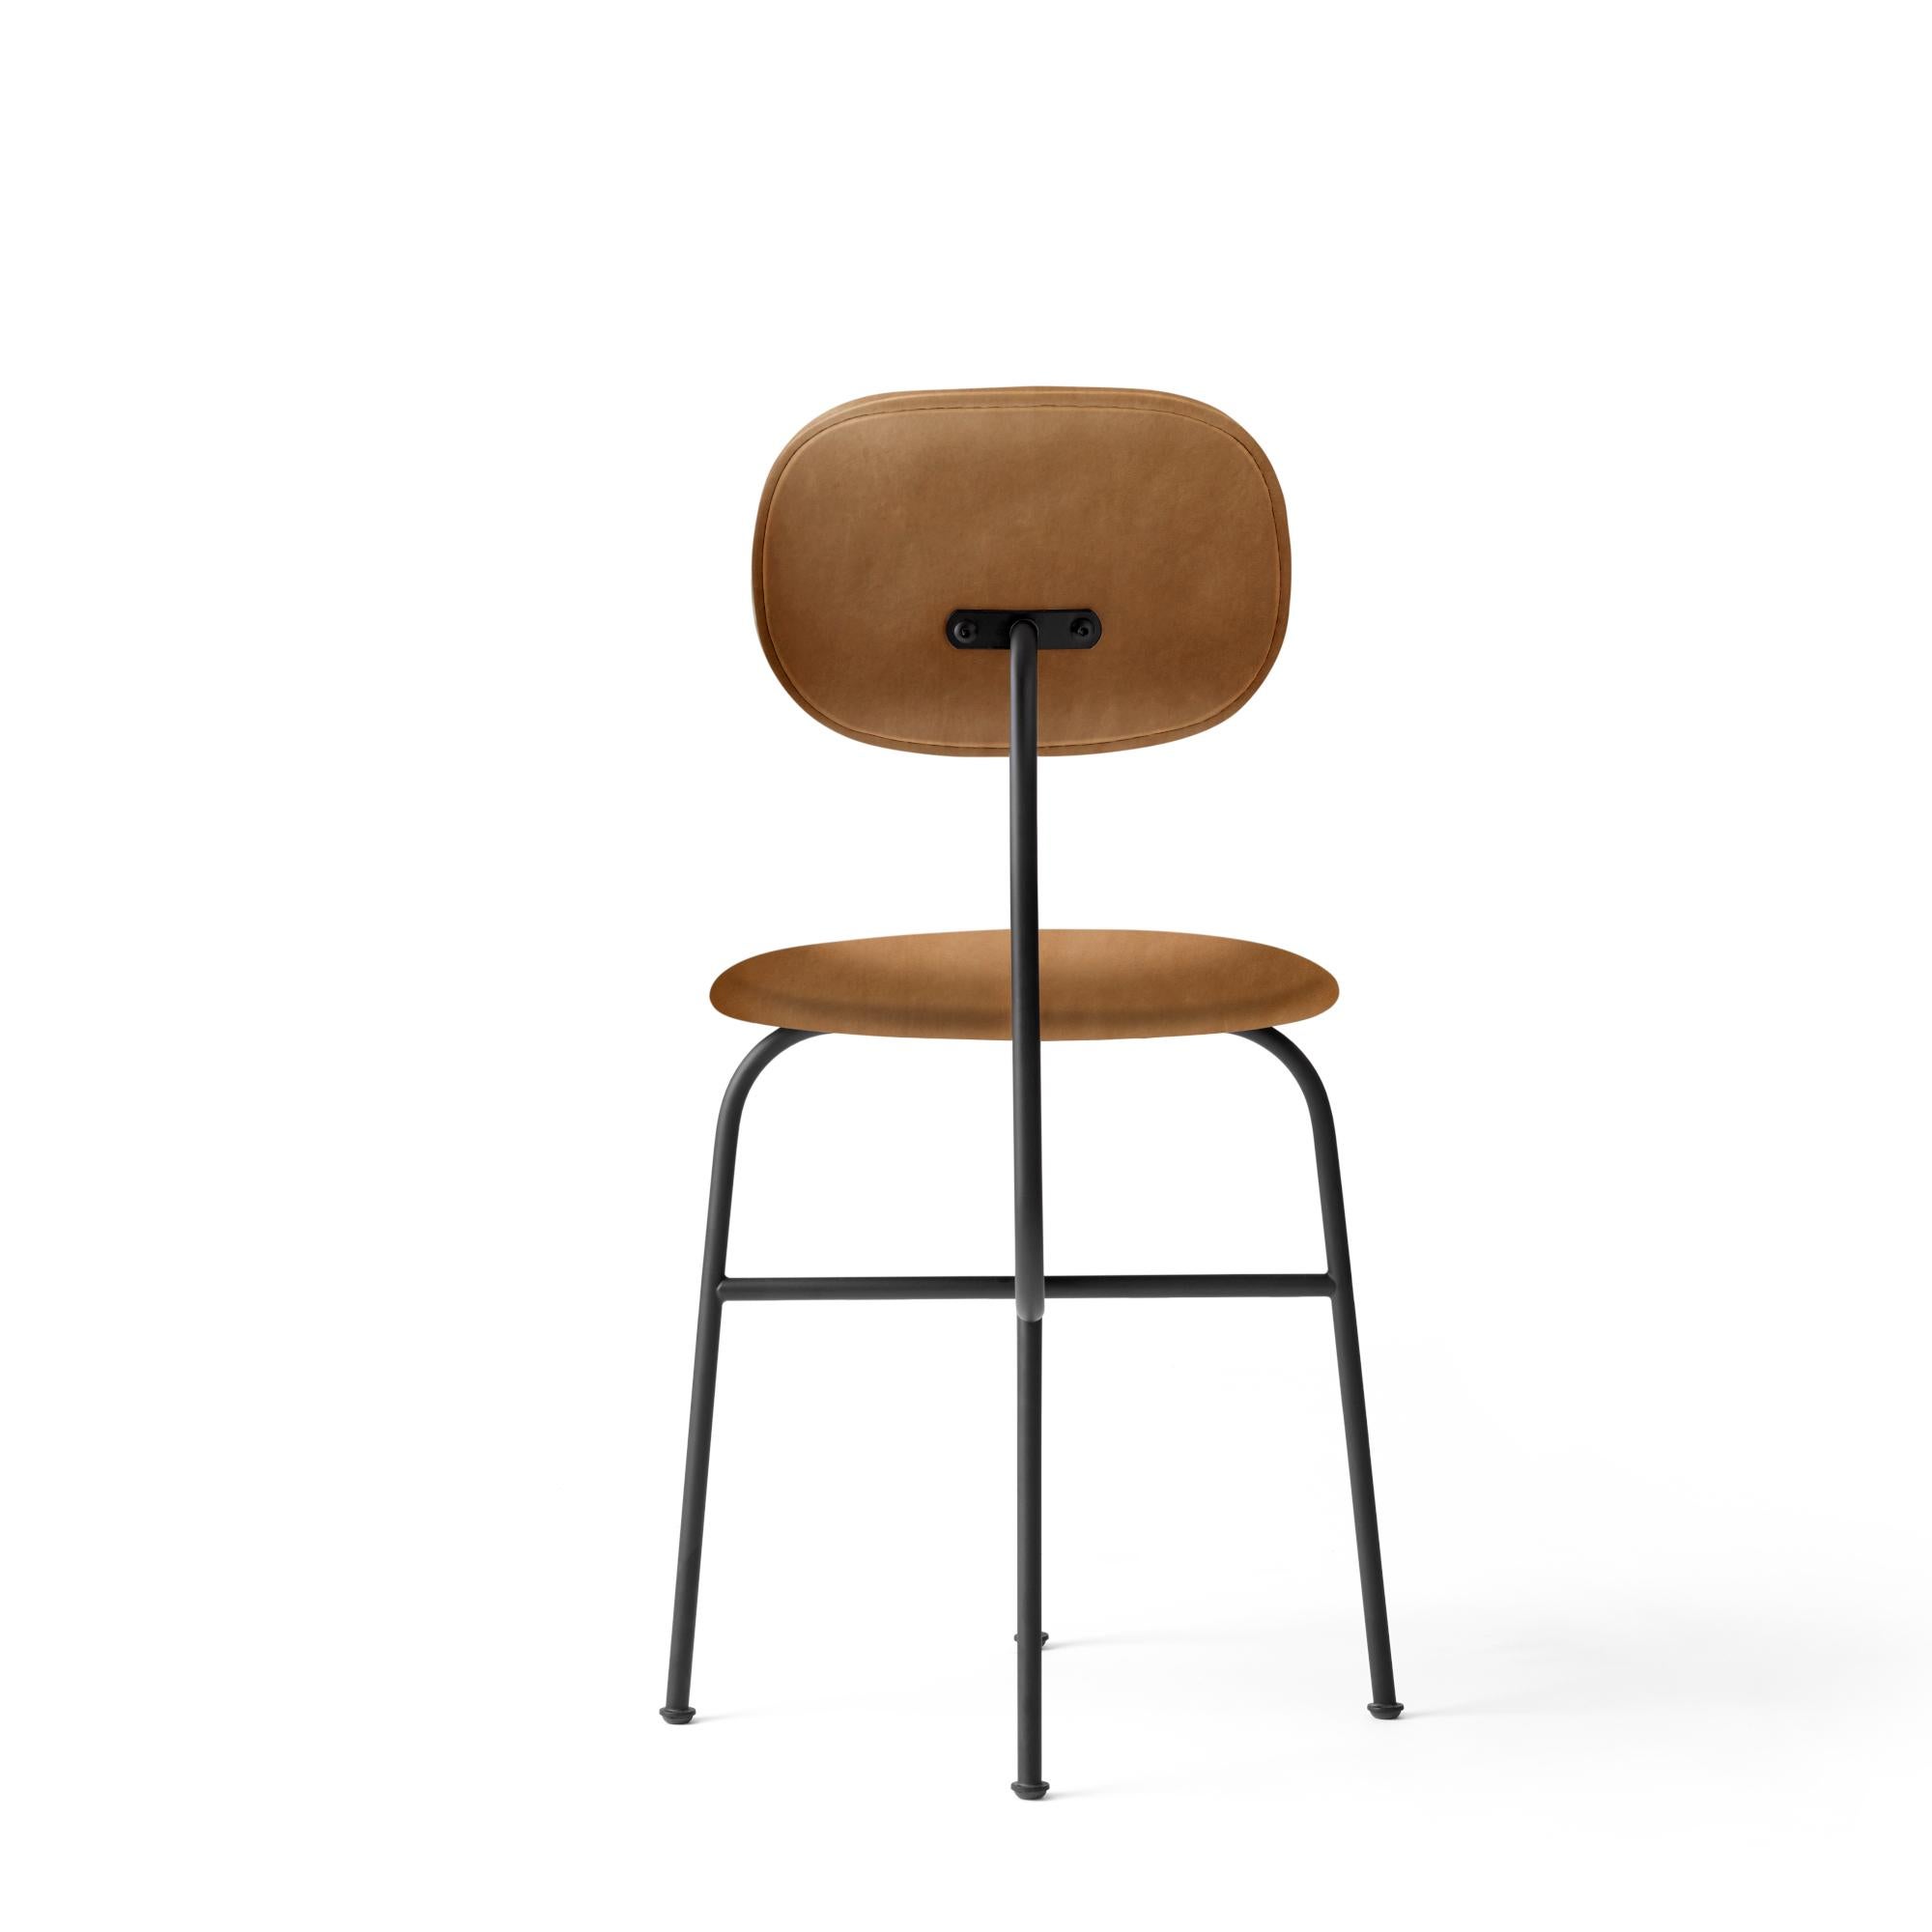 Beautifully minimal, the Afteroom chair pays homage to functionalism and the Bauhaus school of art. A Menu bestseller ever since its launch in 2012, the chair is the work of Afteroom, a young Stockholm-based design studio, founded by designers